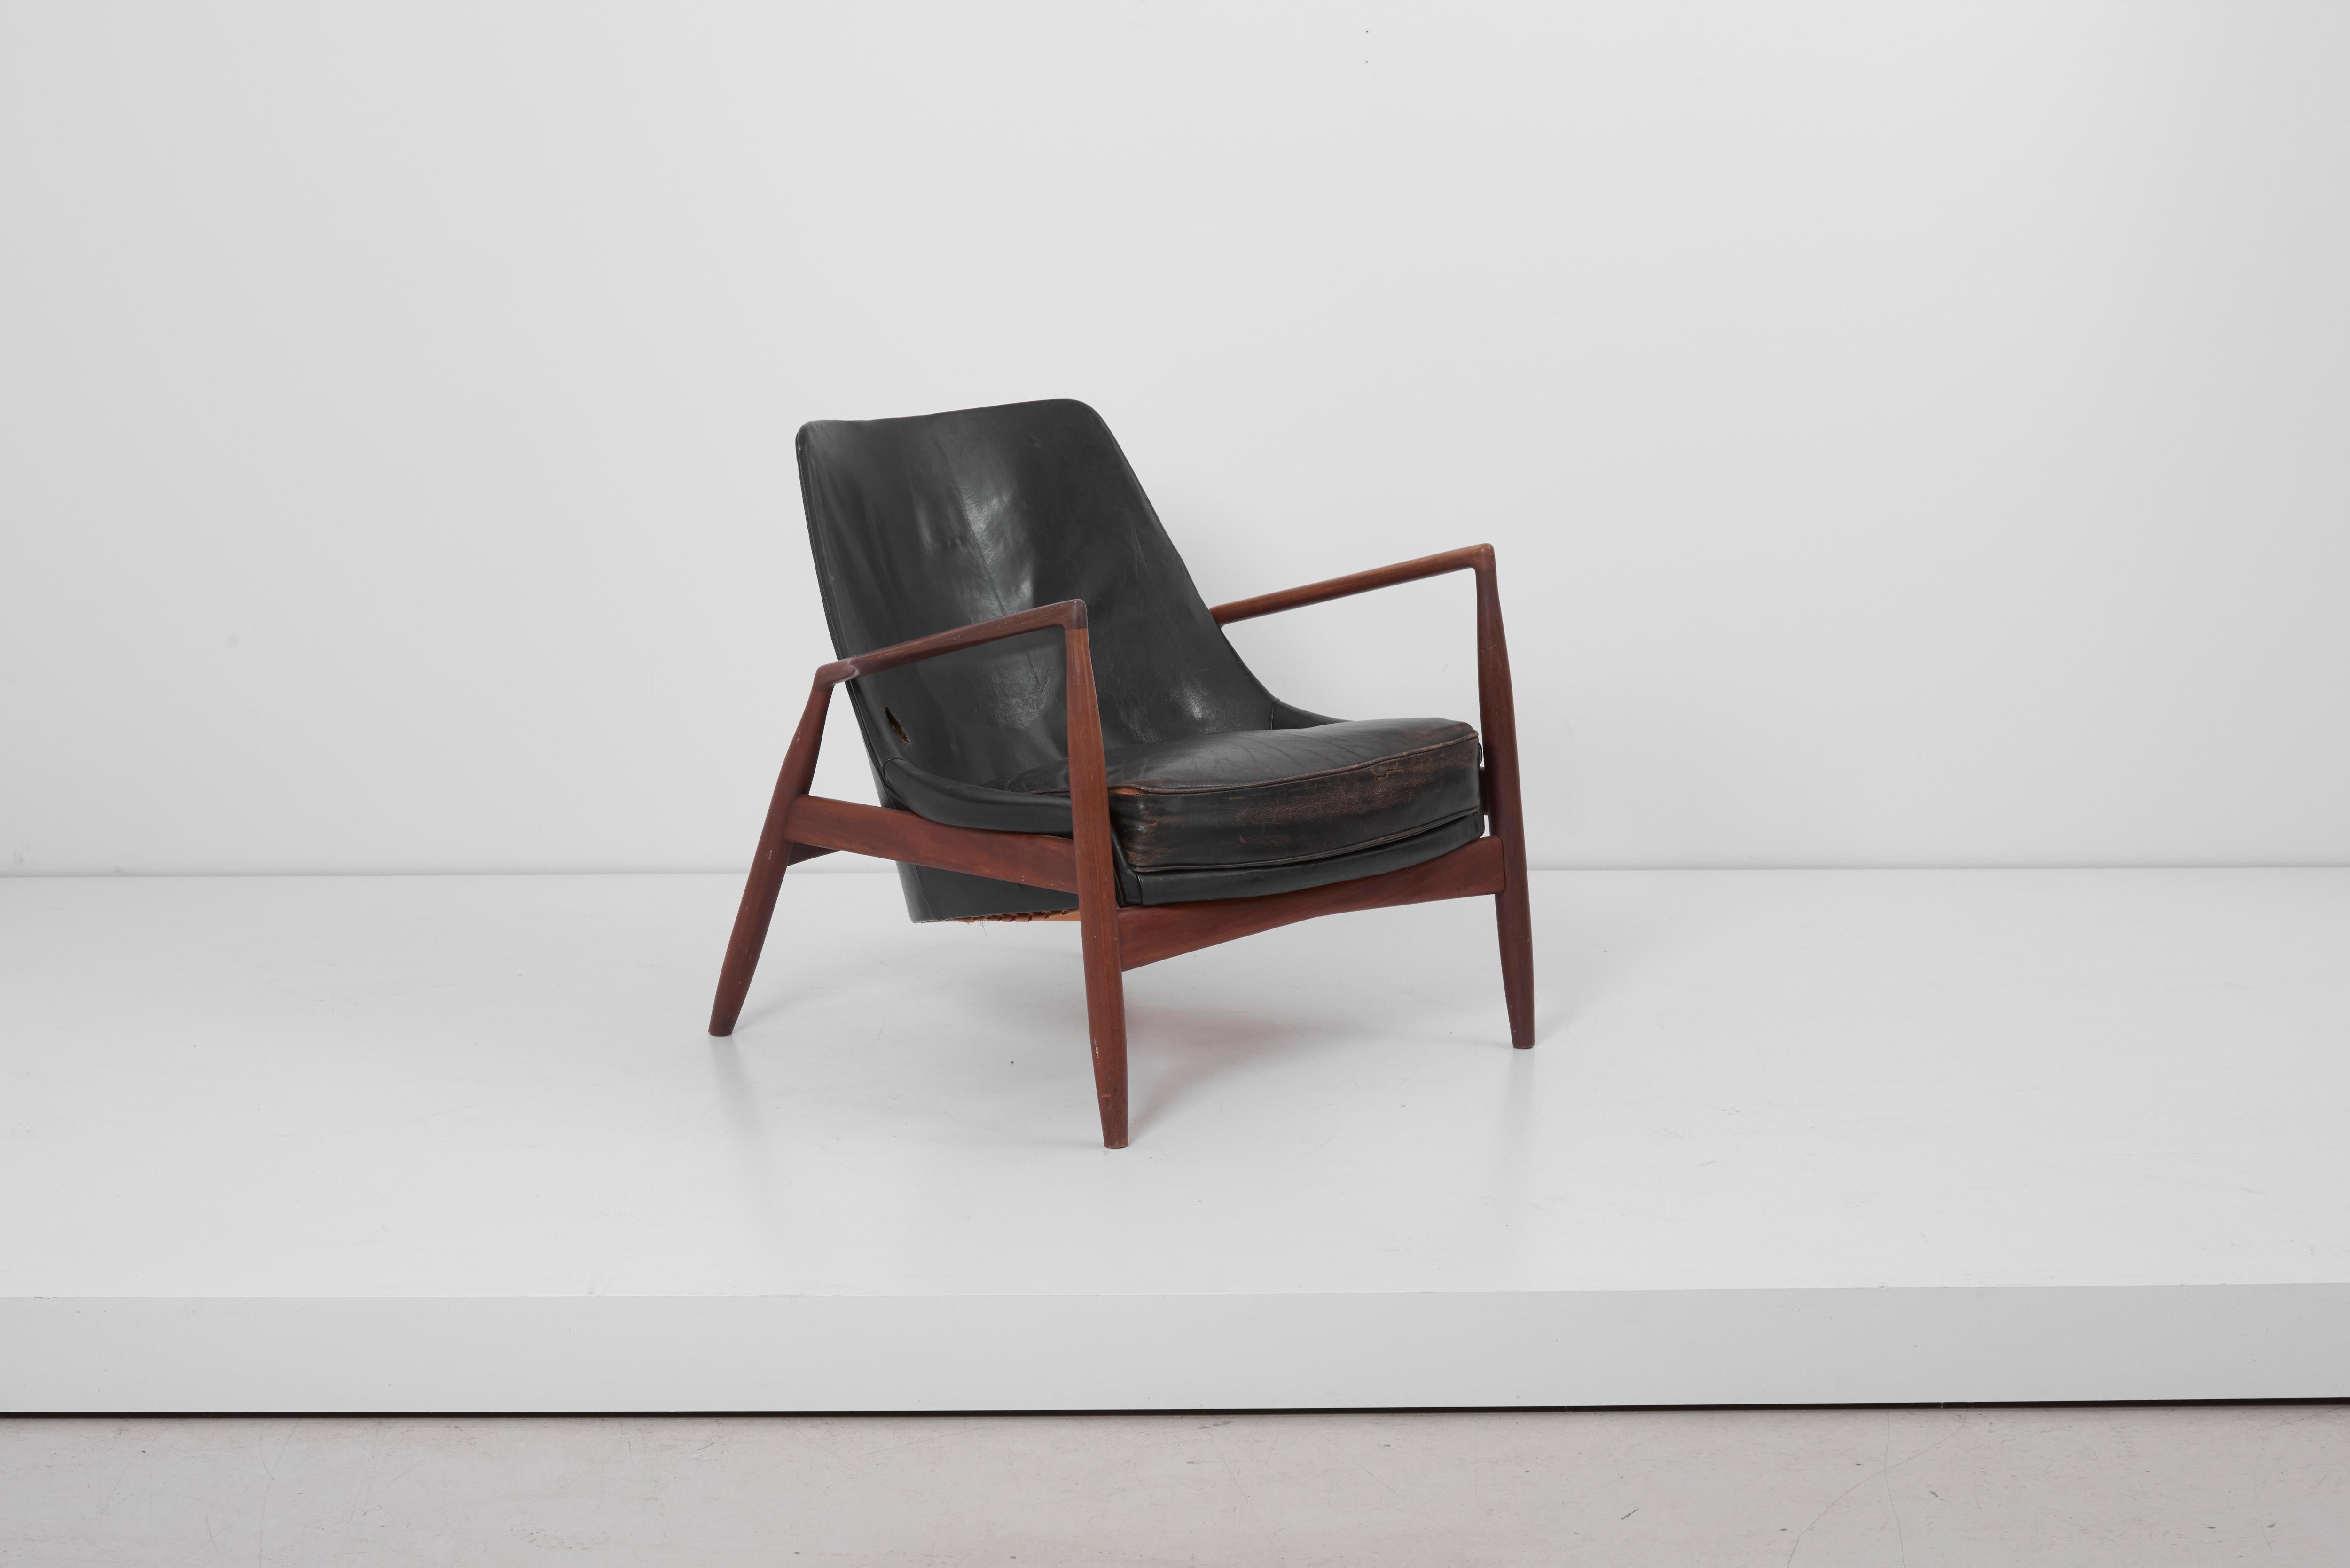 Lounge chair, model Seal / Sälen or 503-799, designed by Ib Kofod-Larsen and manufactured by OPE Olof Persson Möbler in Sweden. In 1956, the Danish furniture architect Ib Kofod-Larsen got an assignment from the Swedish furniture maker OPE Möbler to